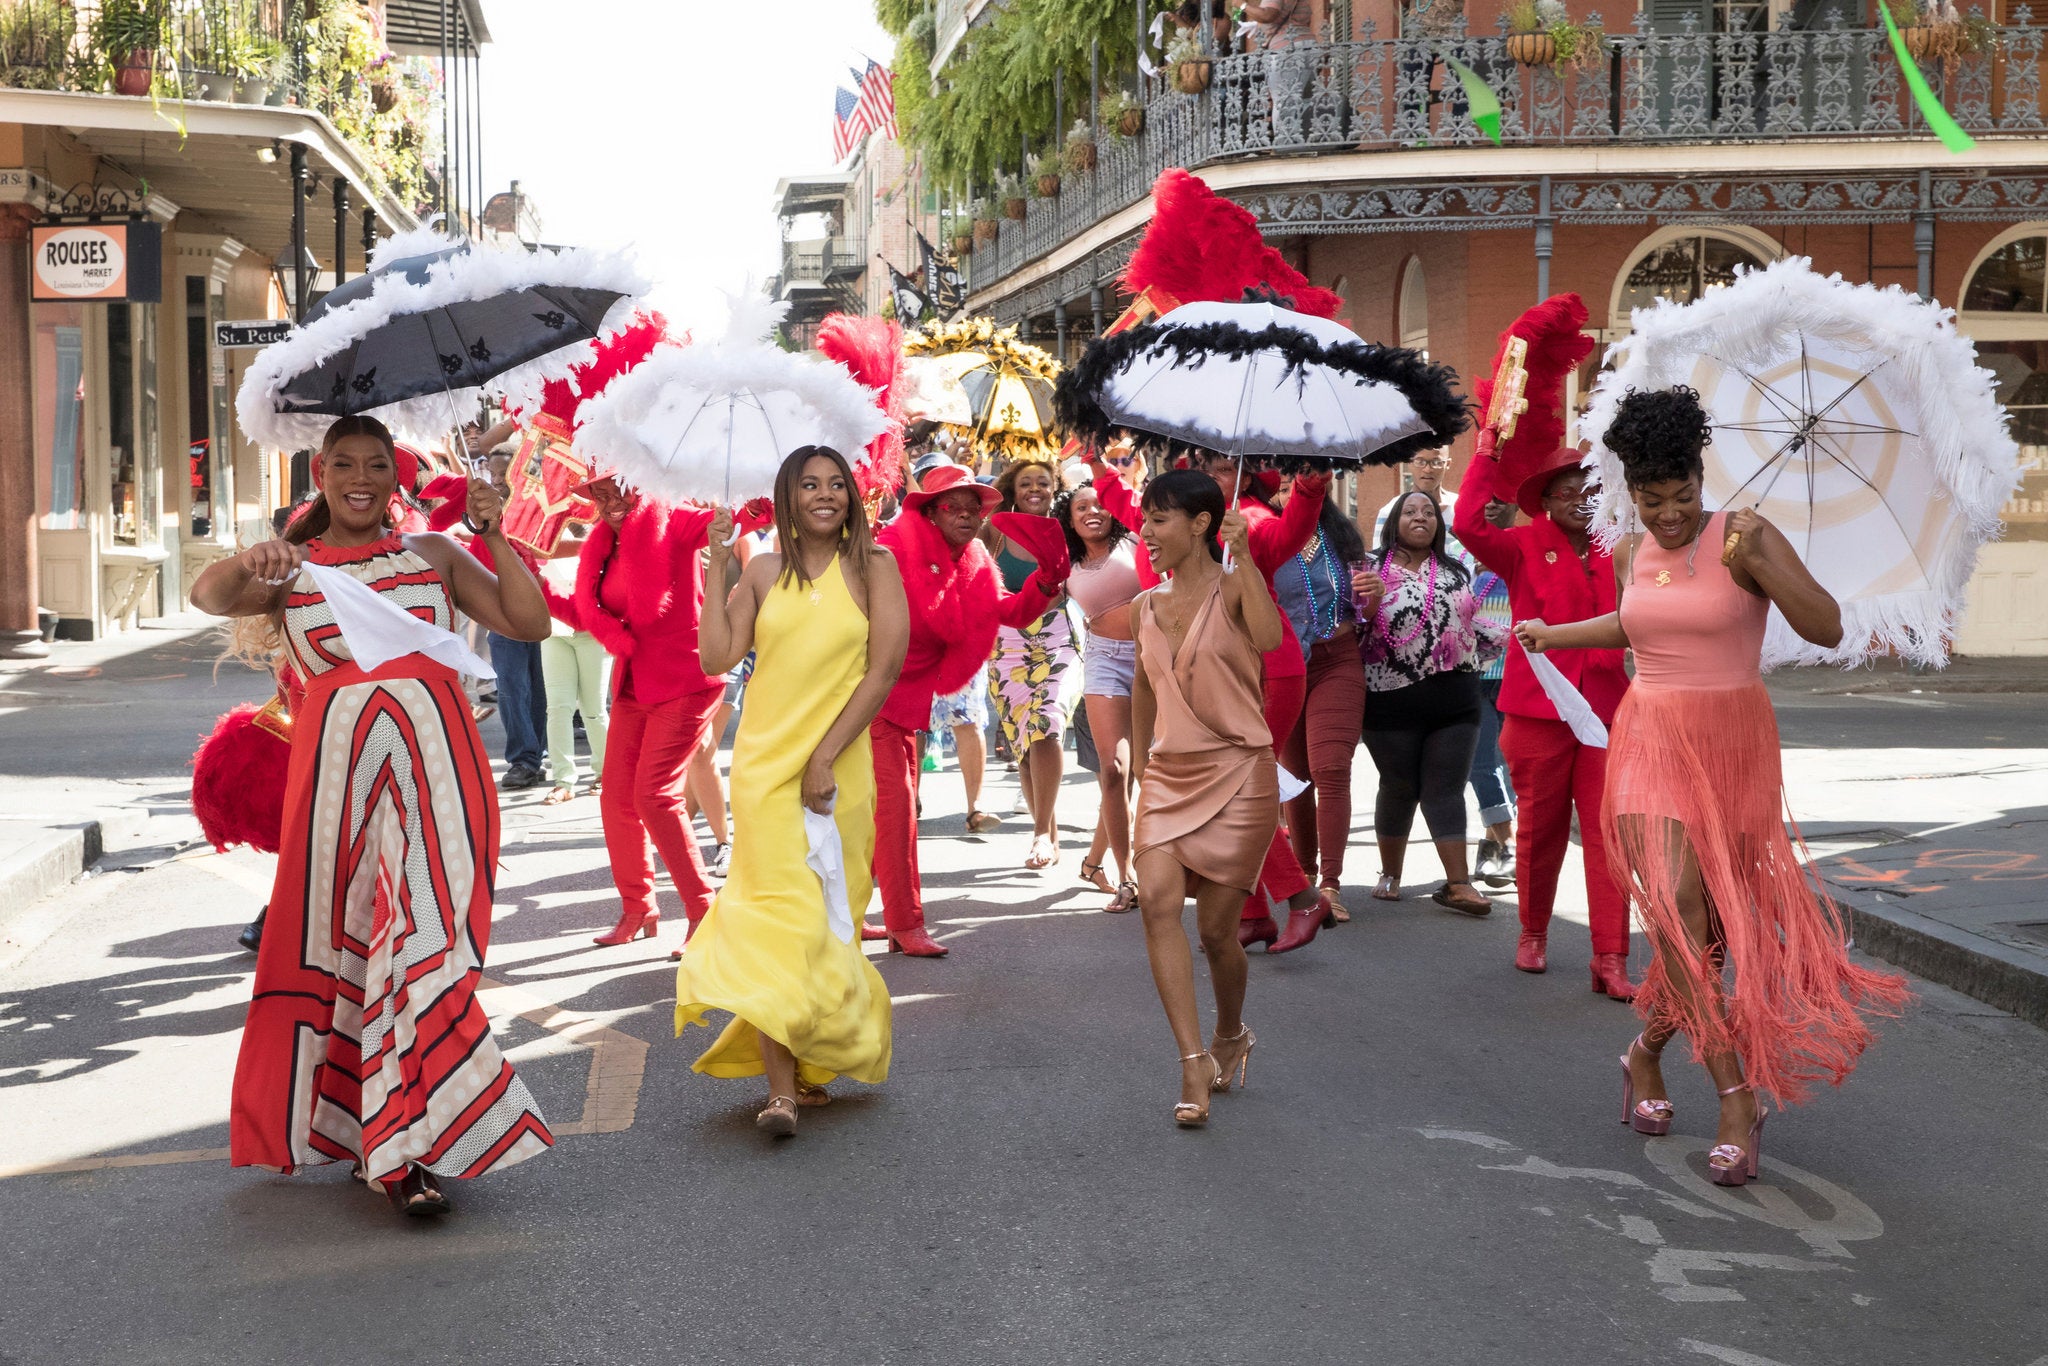 Wanna Do ESSENCE Fest 2018 Just Like The Flossy Posse? Here Are All The NOLA Hot Spots From 'Girls Trip'
